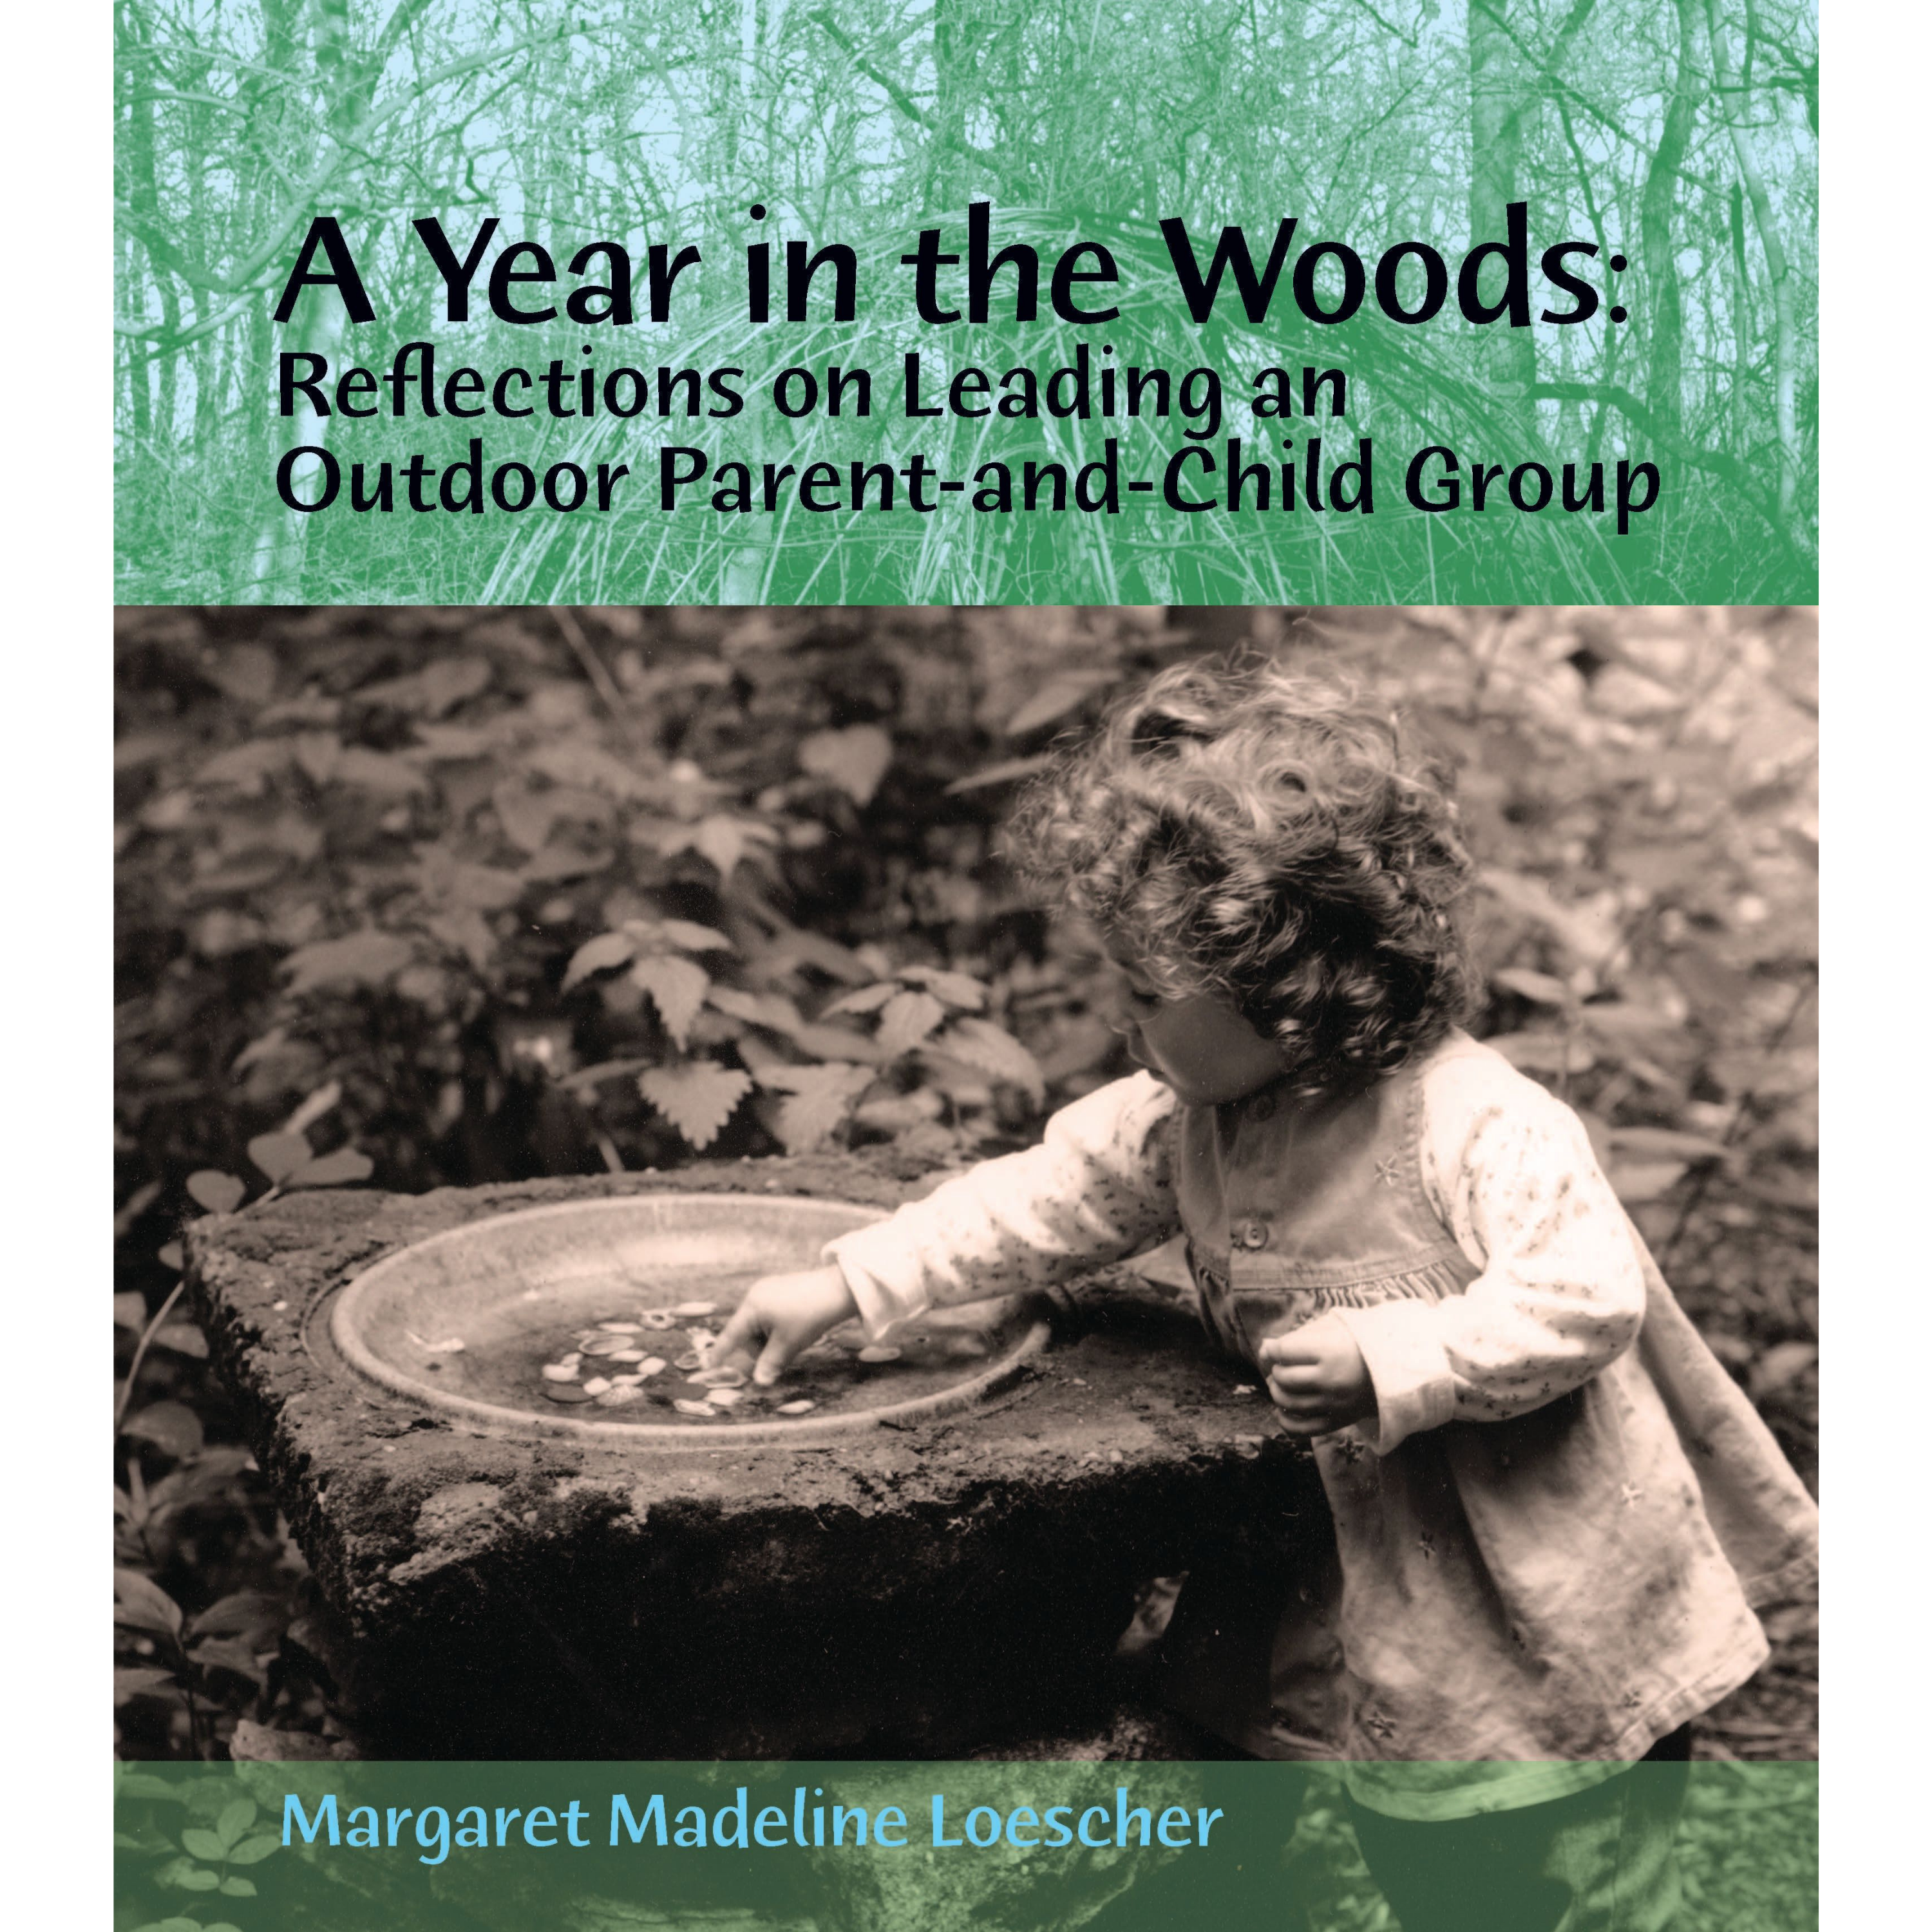 A Year in the Woods: Reflections on Leading an Outdoor Parent-and-Child Group